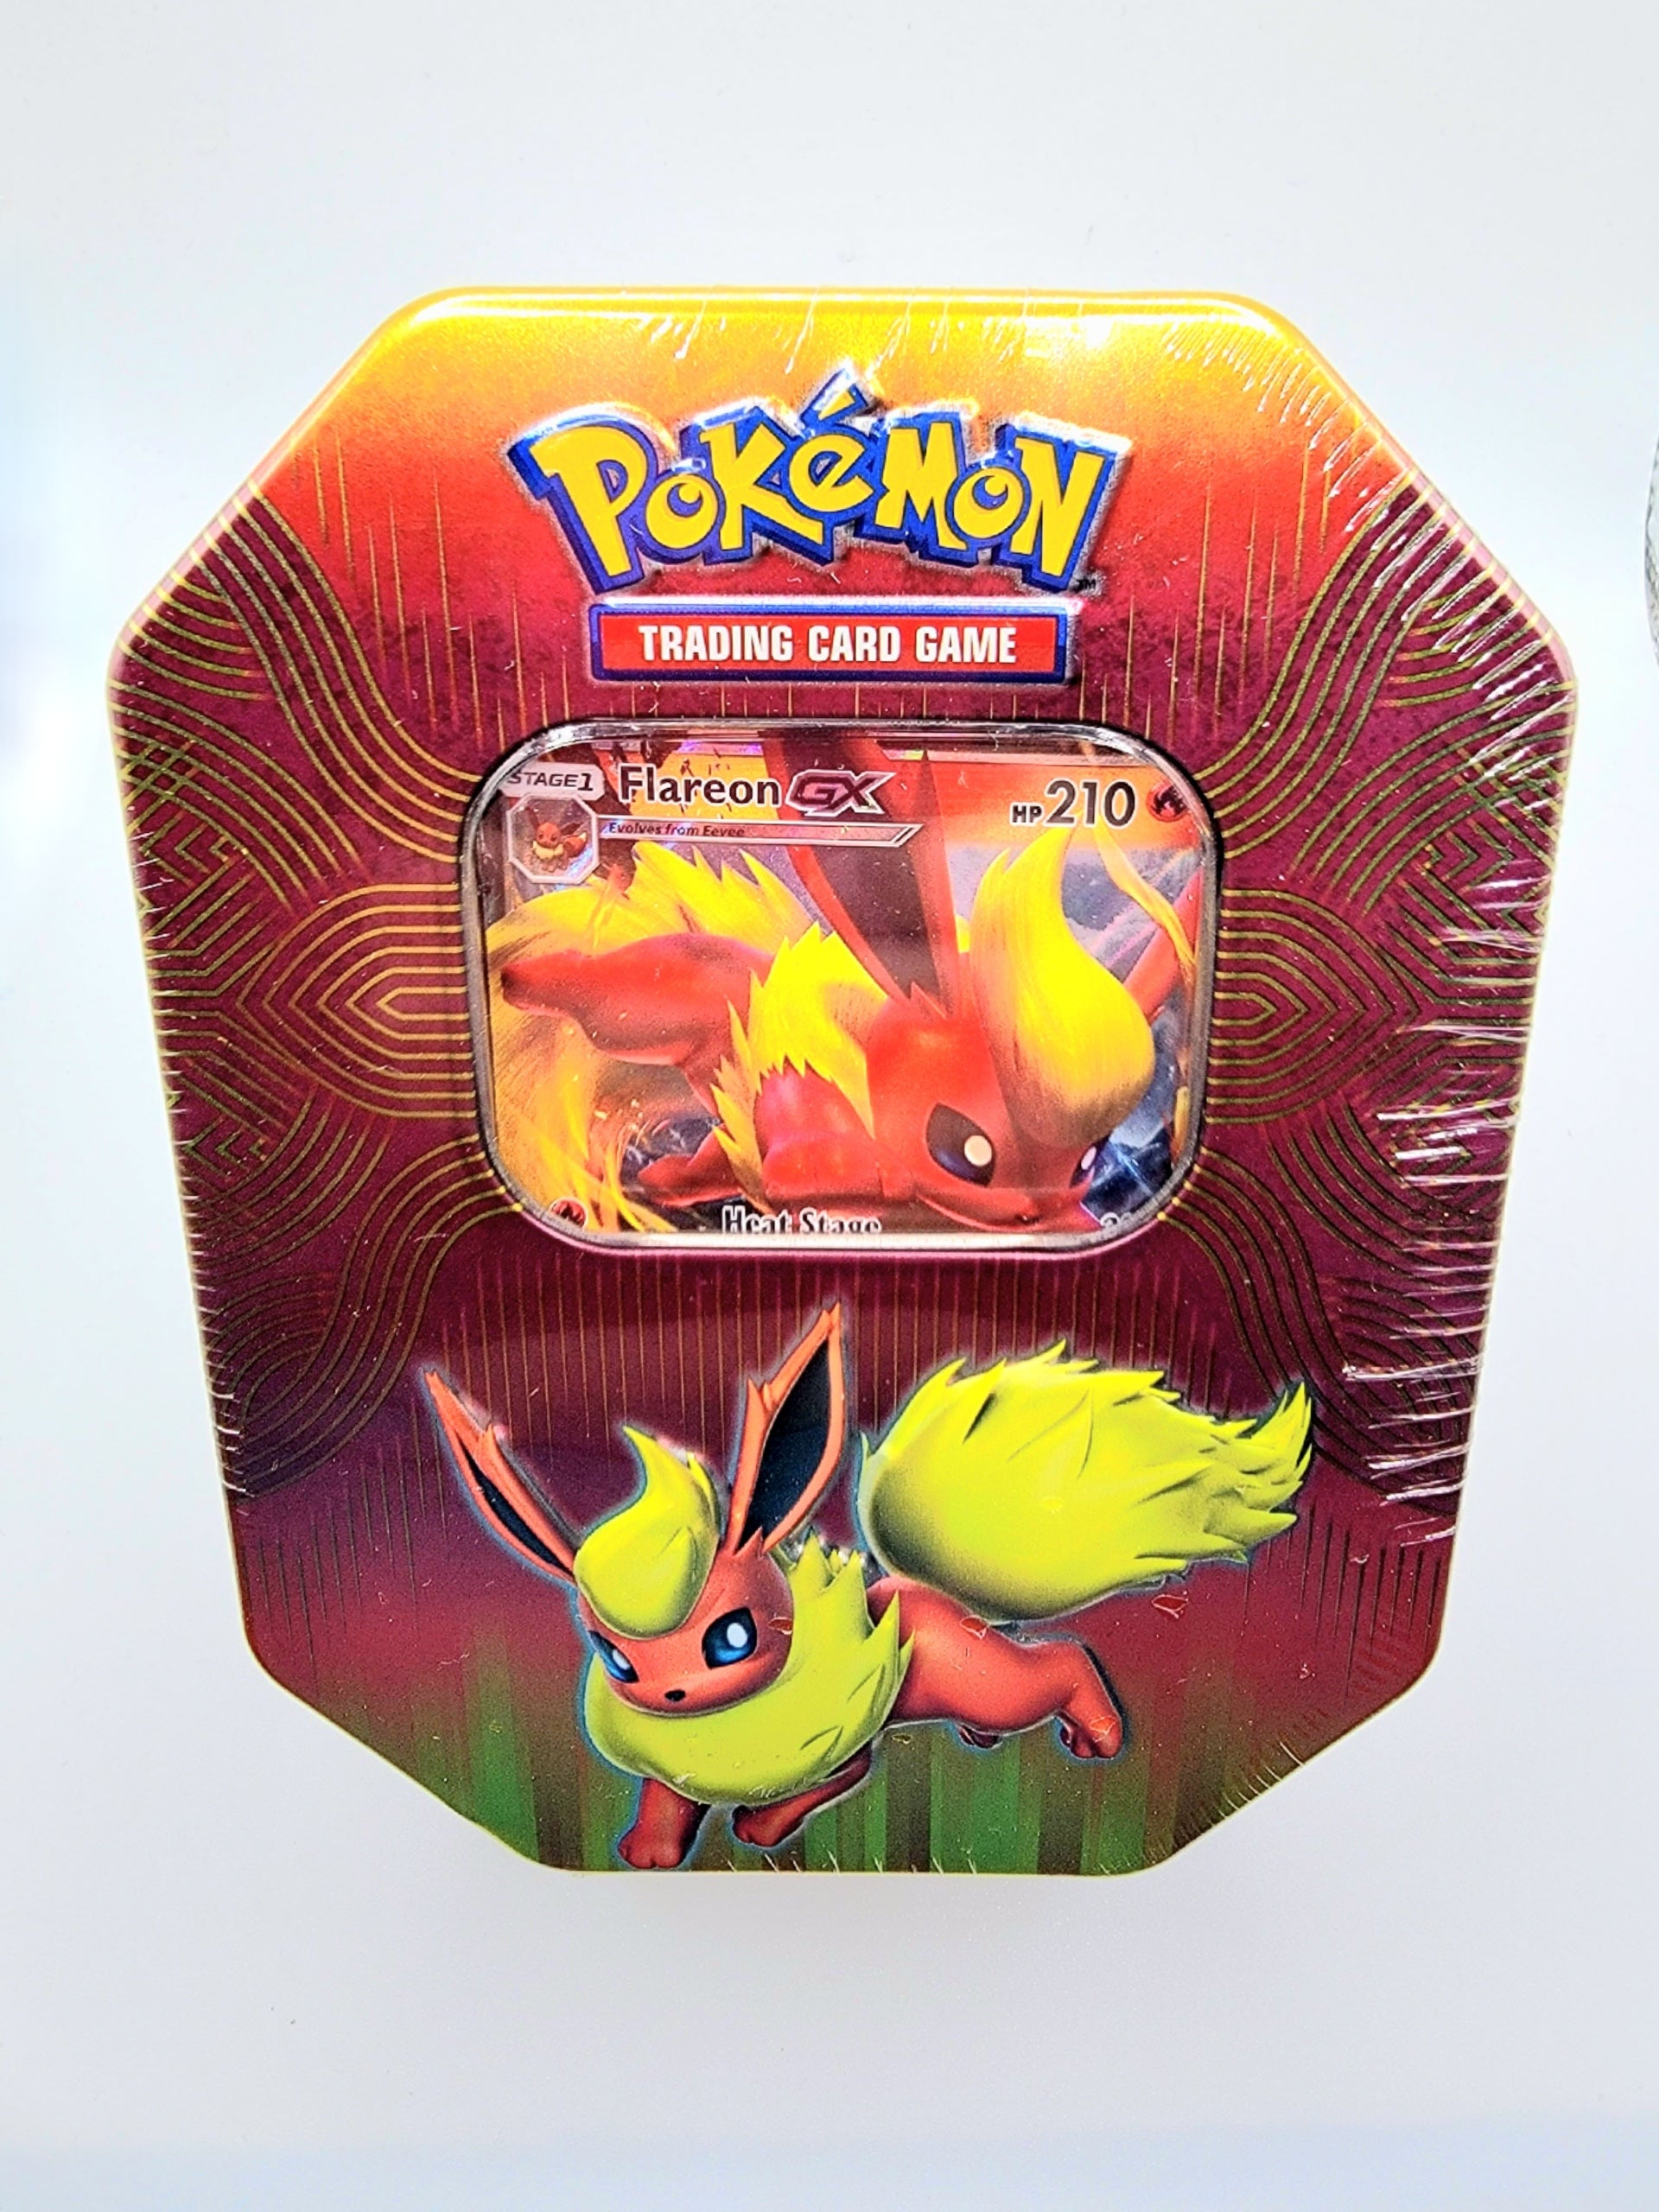 Each Flareon GX tin includes one foil promo Flareon card, 4 TCG packs, and one online code card.